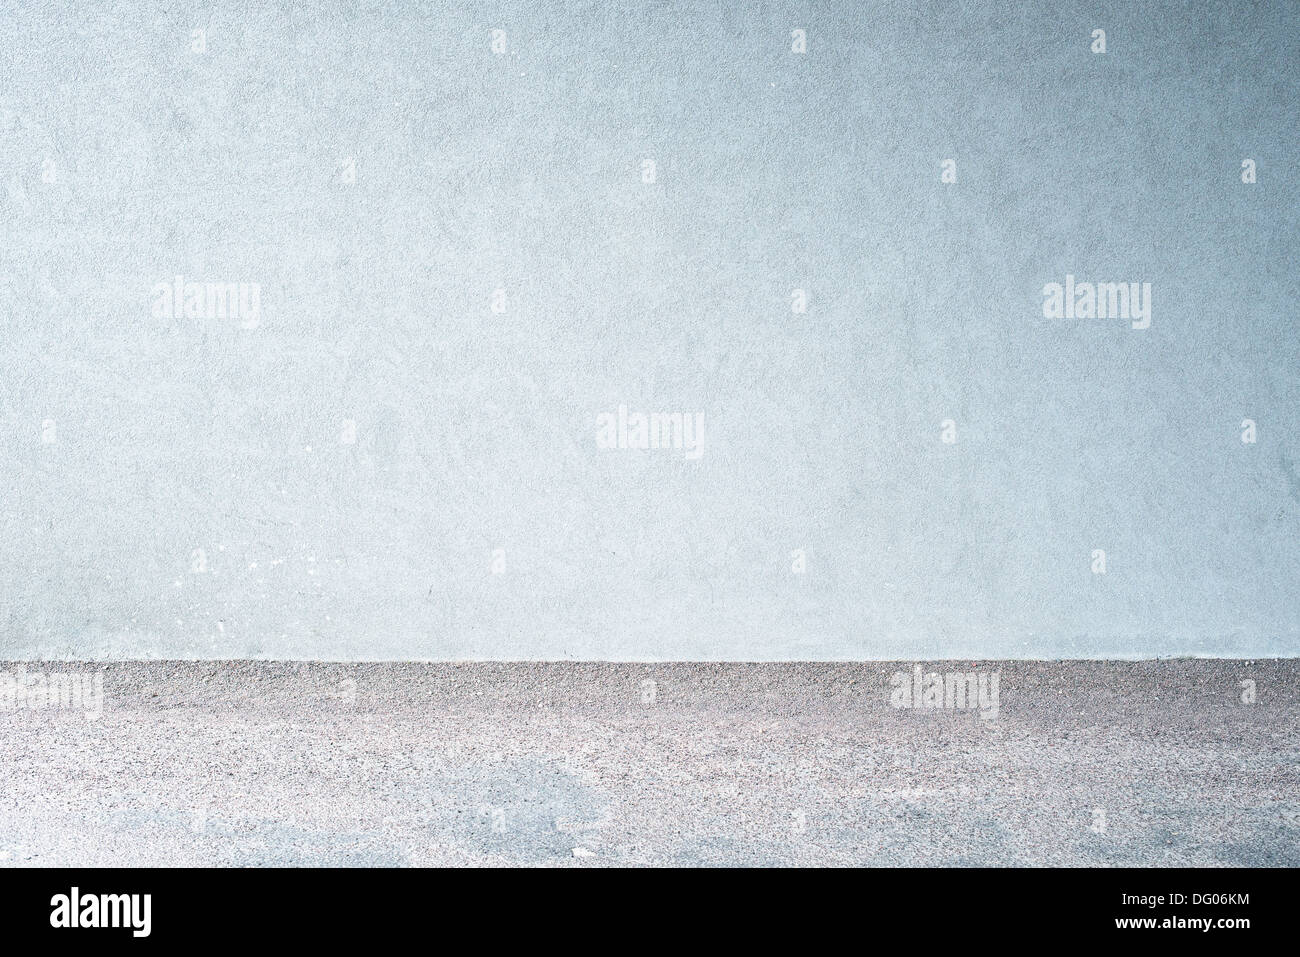 Urban background. Empty wall and ground. Stock Photo